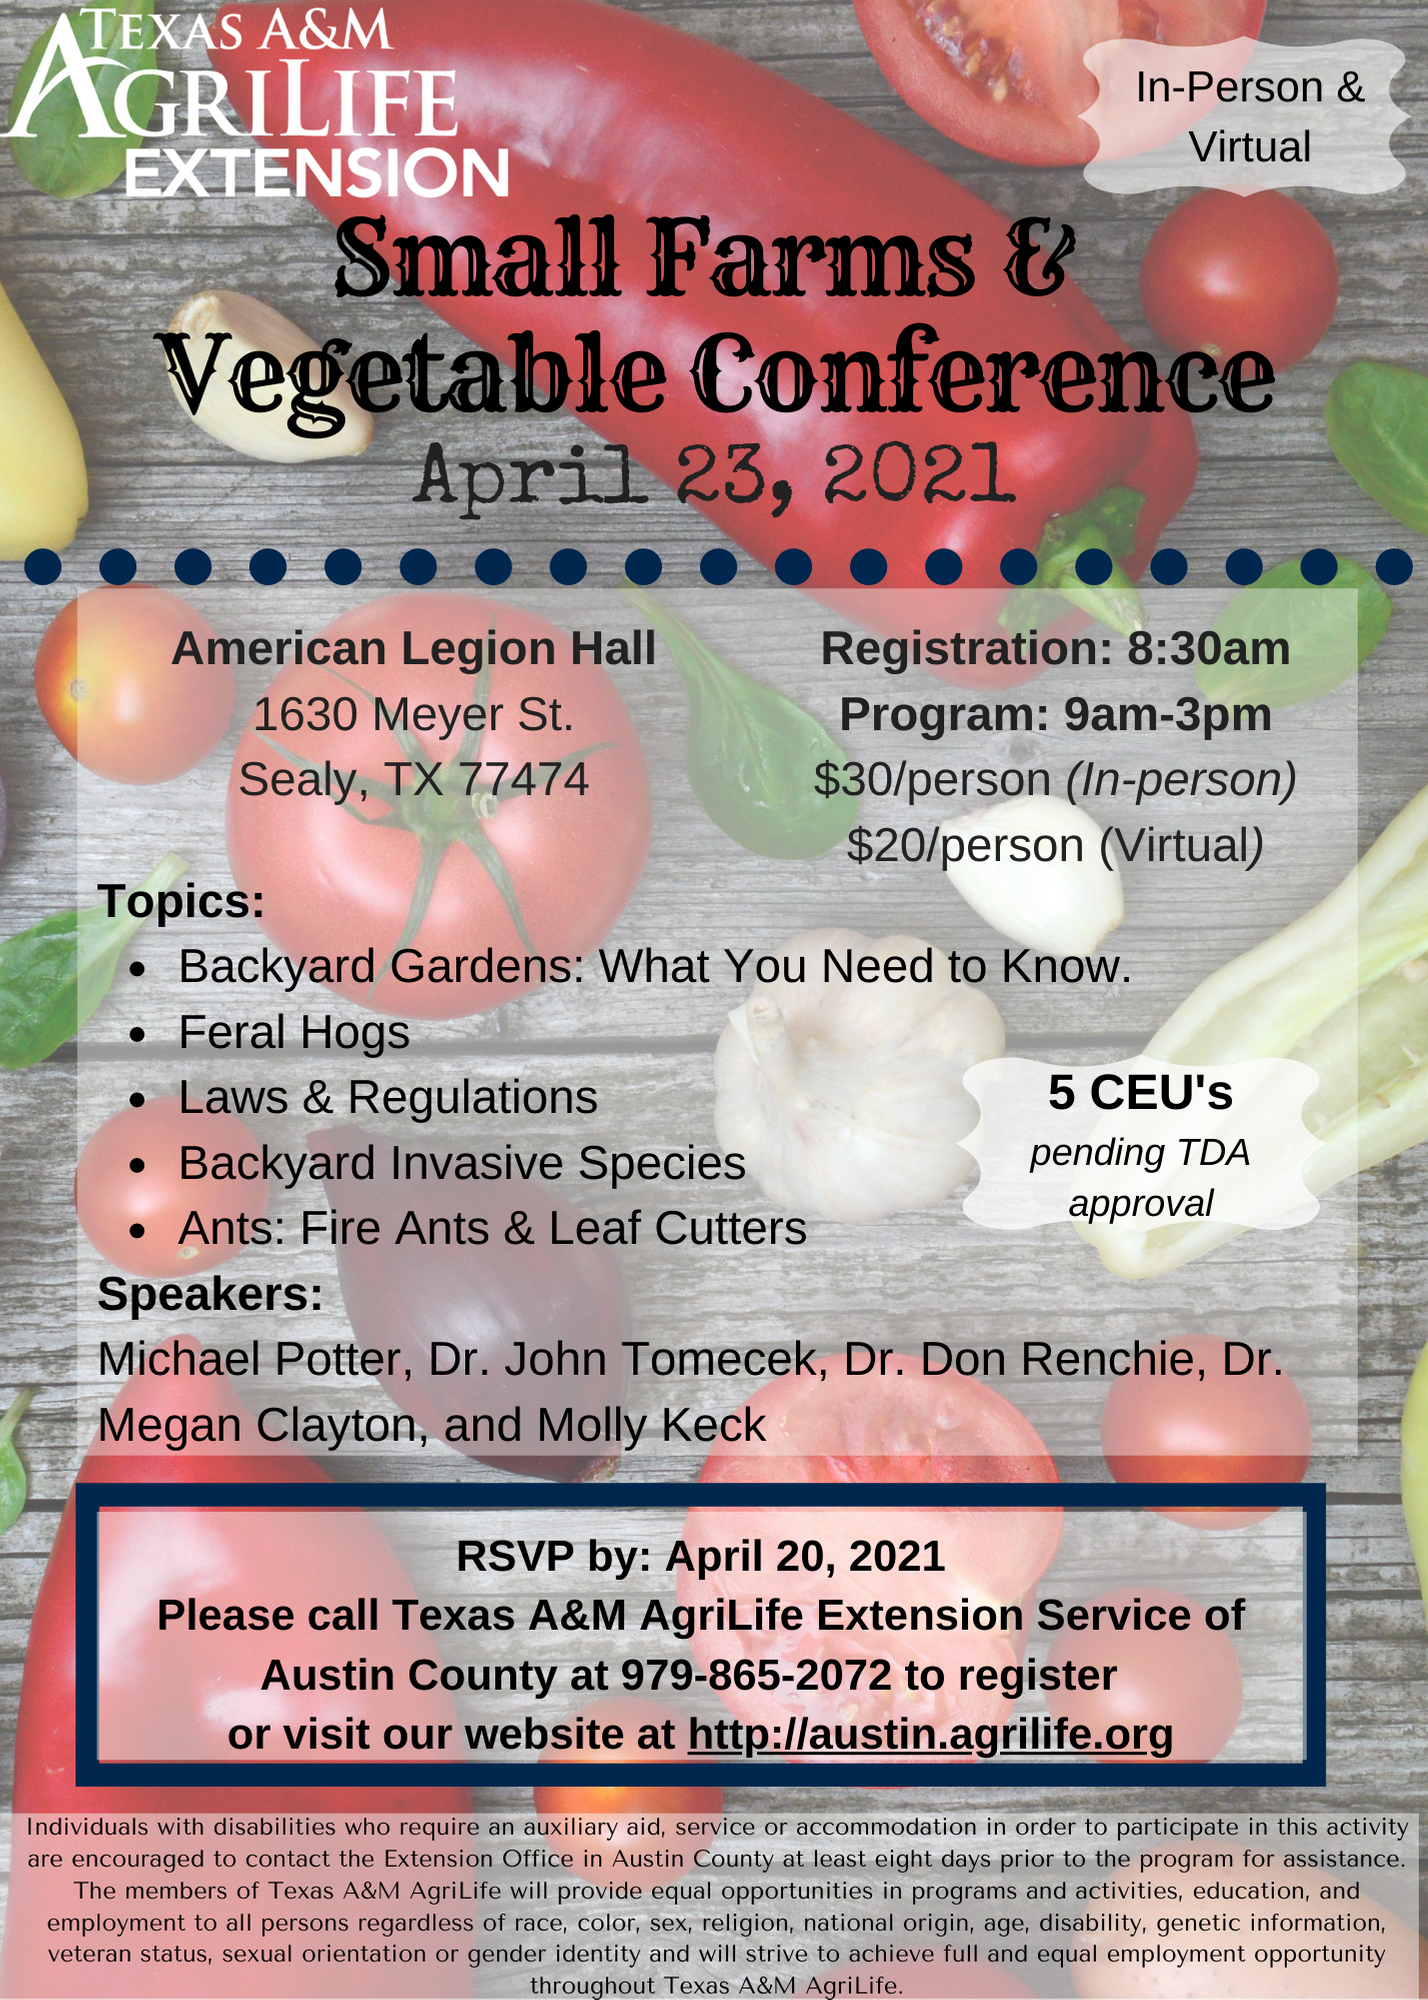 Small Farms & Vegetable Conference flyer